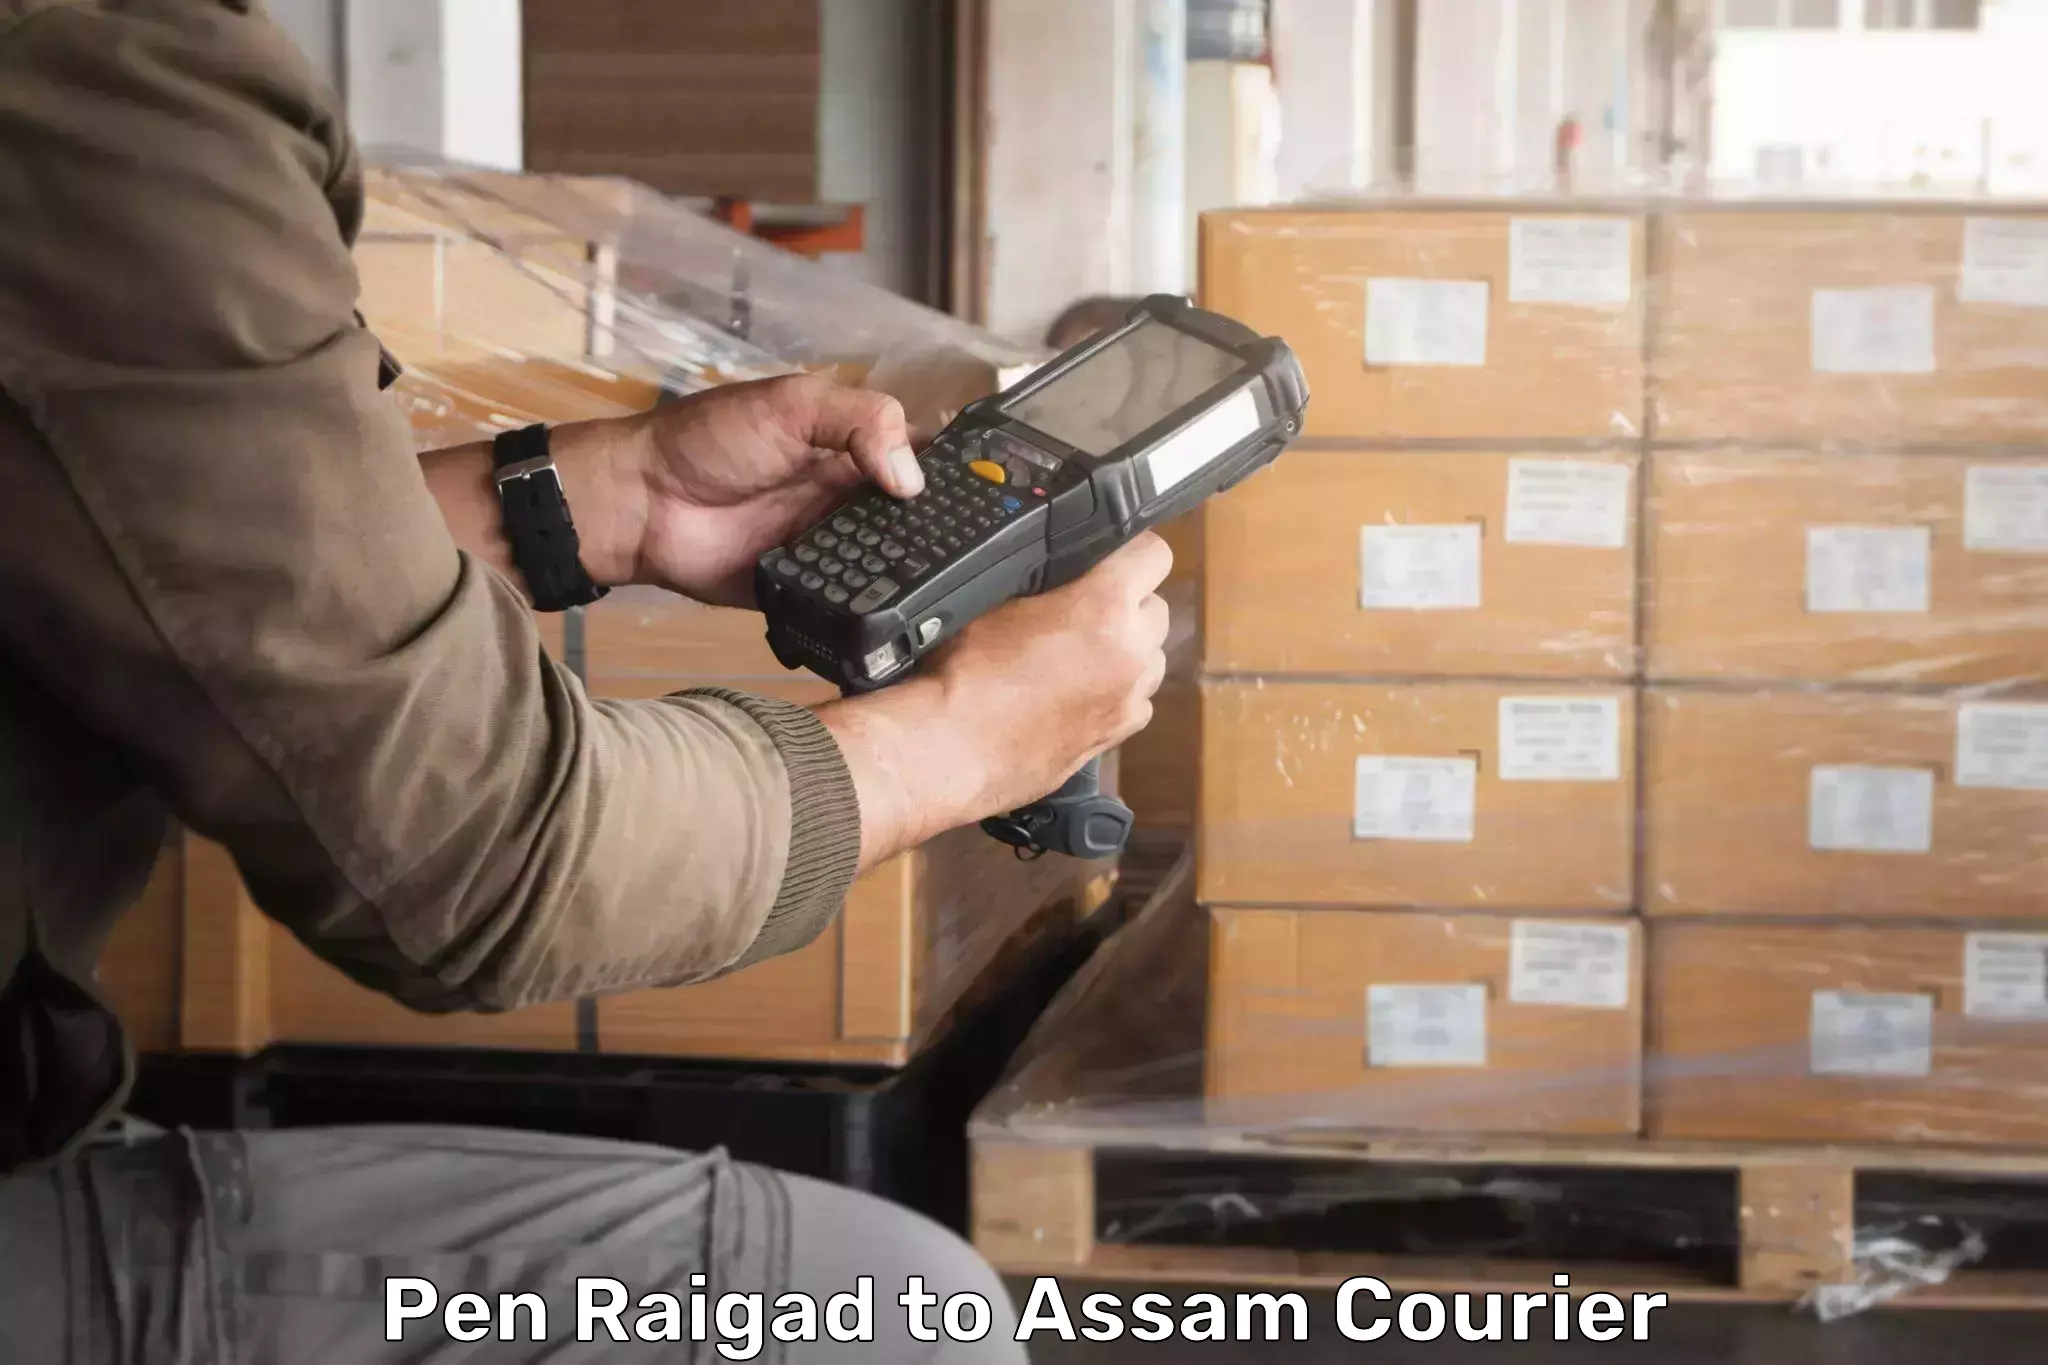 Full-service courier options Pen Raigad to Rupai Siding